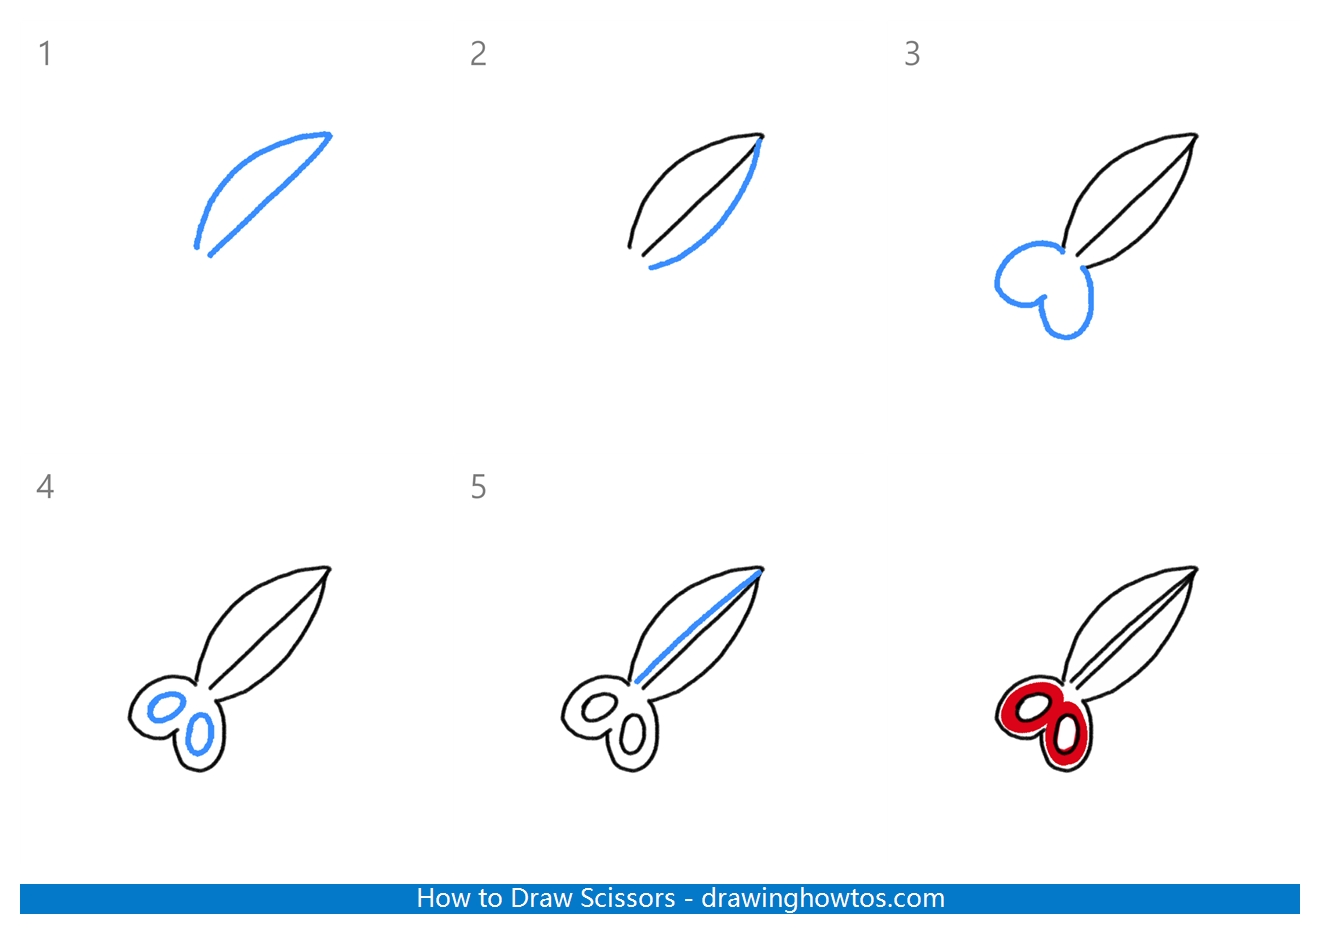 How to Draw Scissors Step by Step